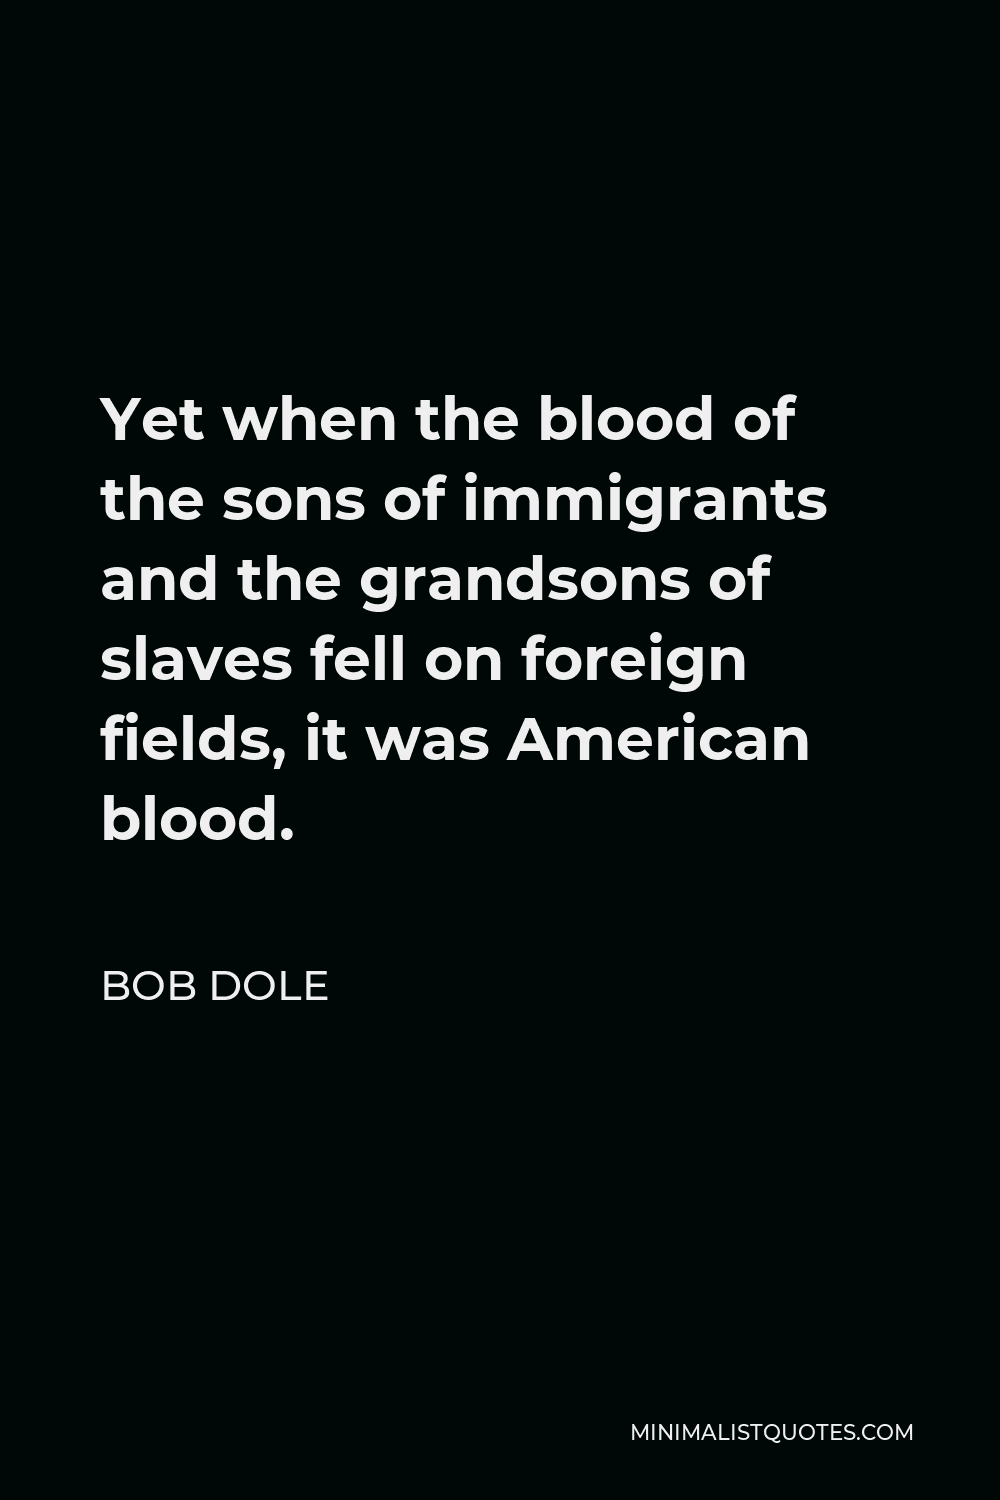 Bob Dole Quote - Yet when the blood of the sons of immigrants and the grandsons of slaves fell on foreign fields, it was American blood.